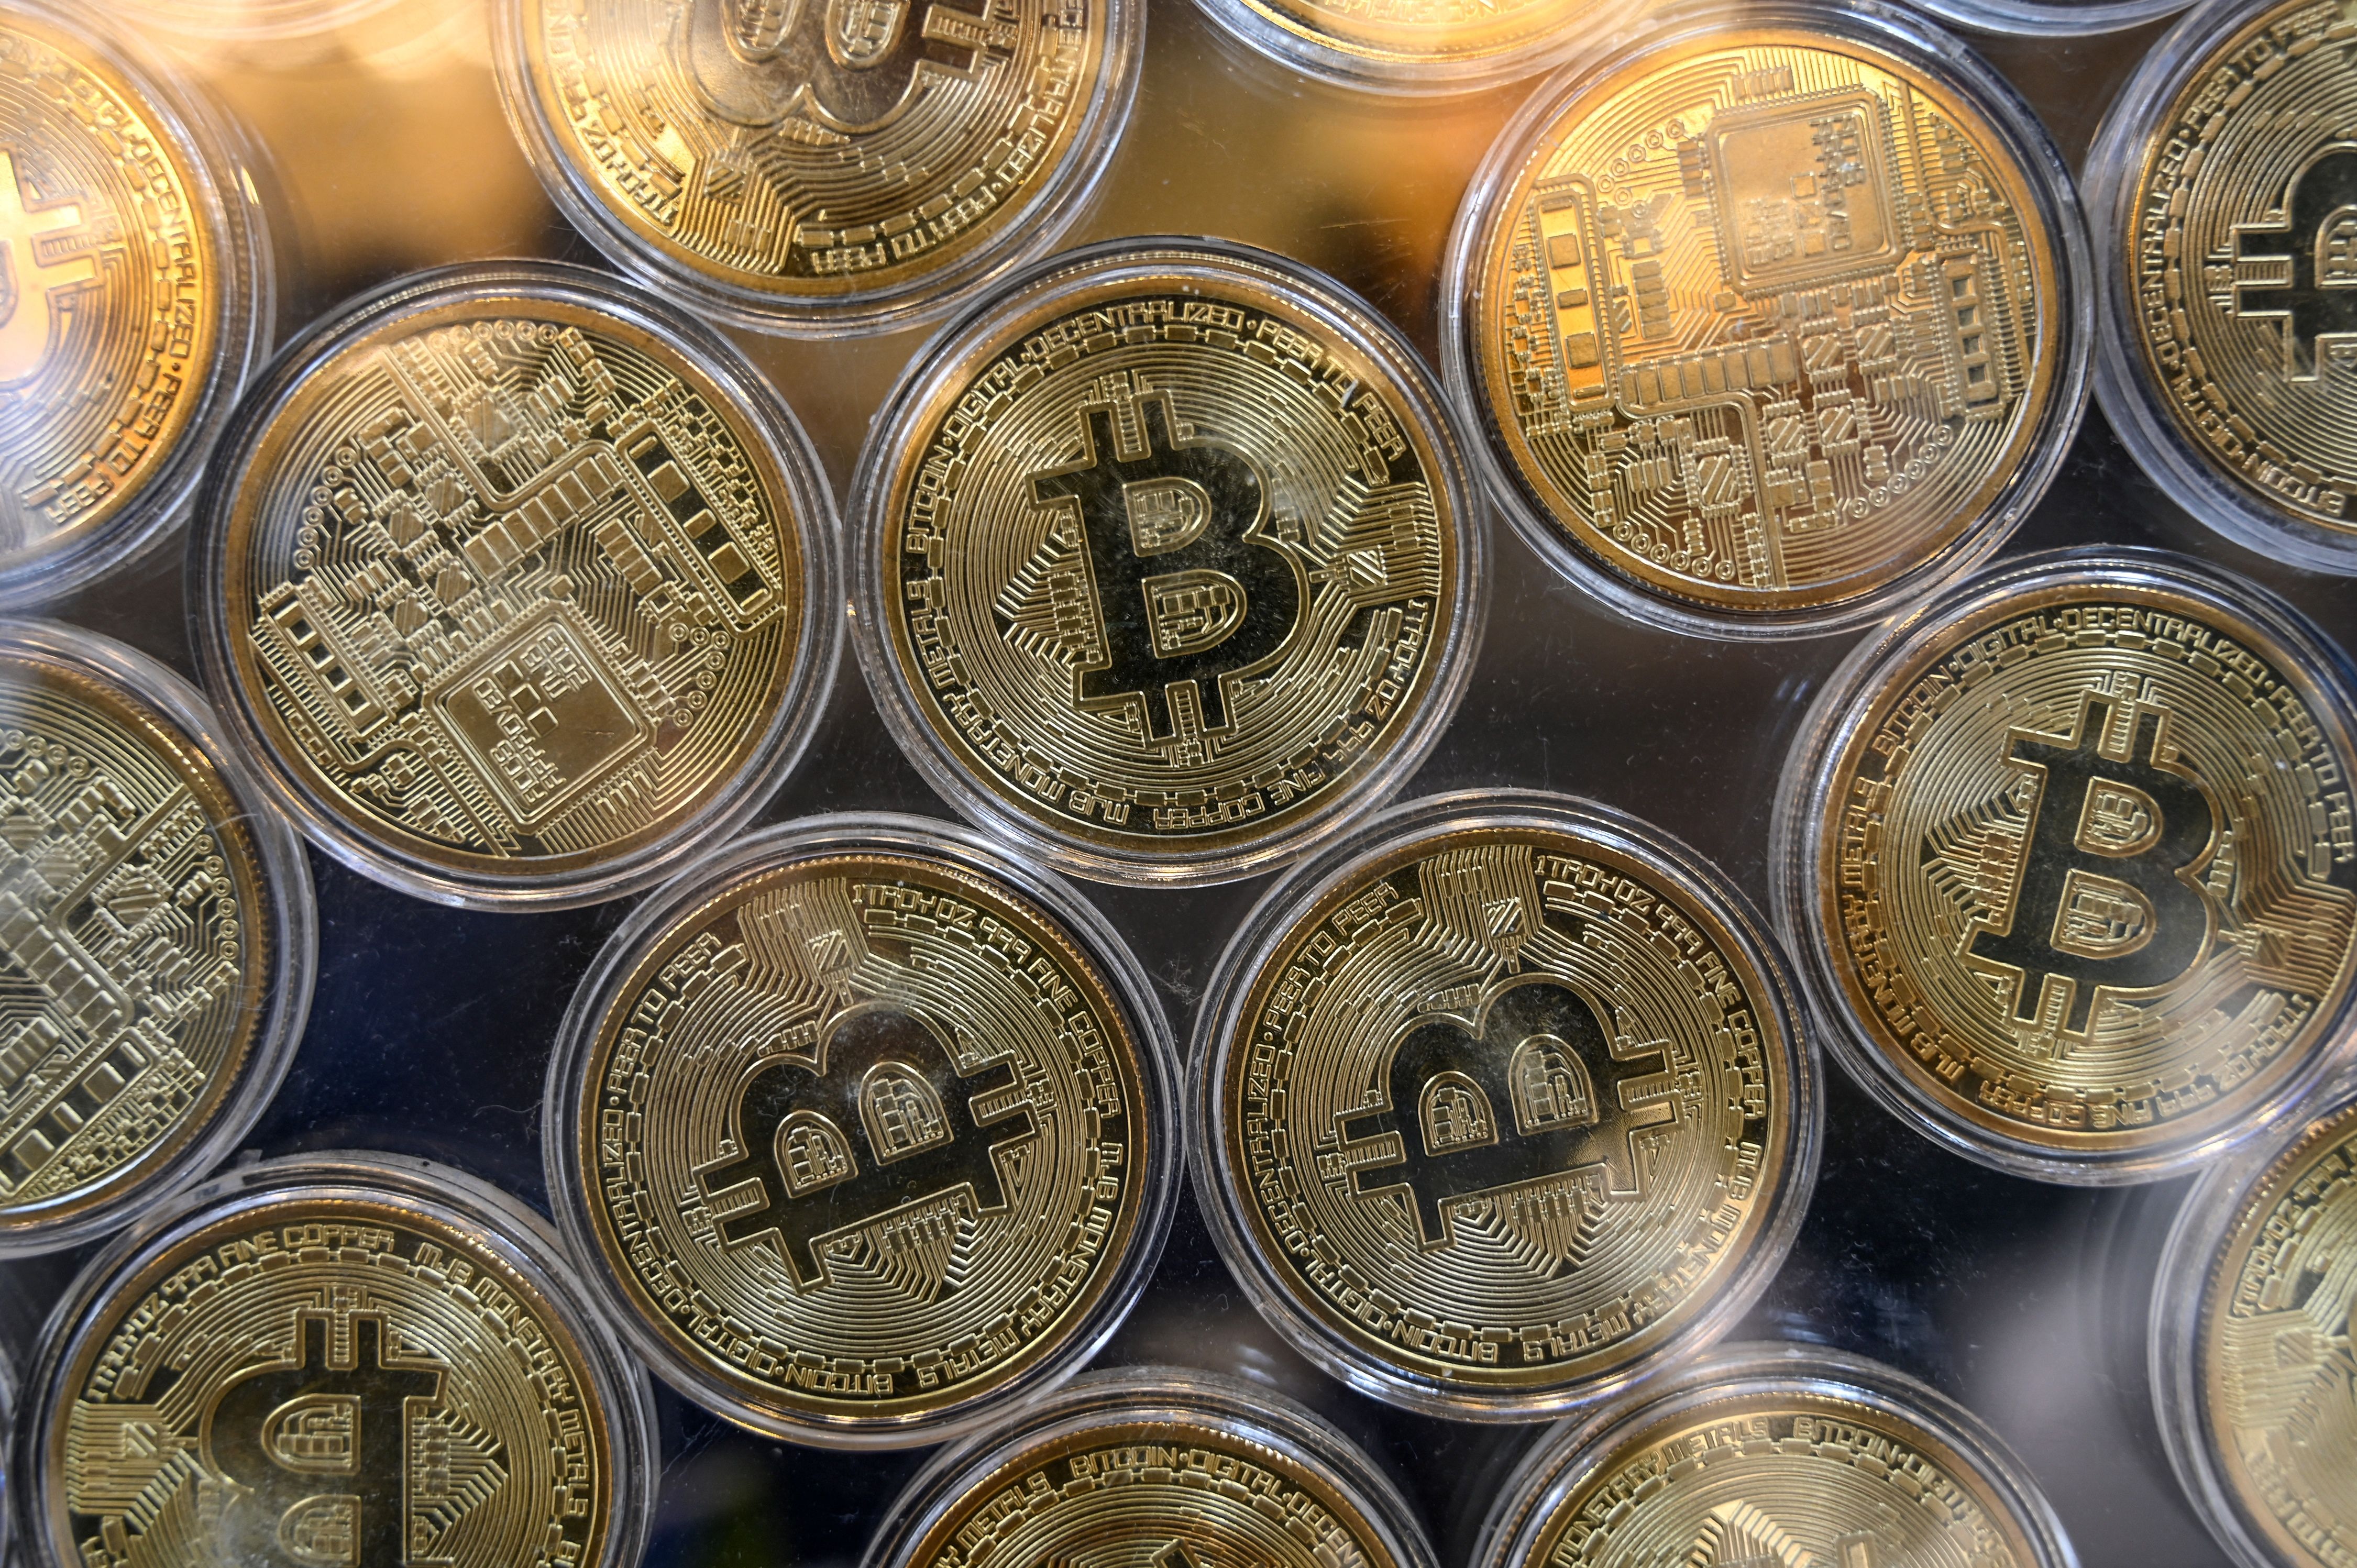 File photo: Physical imitation of Bitcoins are pictured at a cryptocurrency exchange